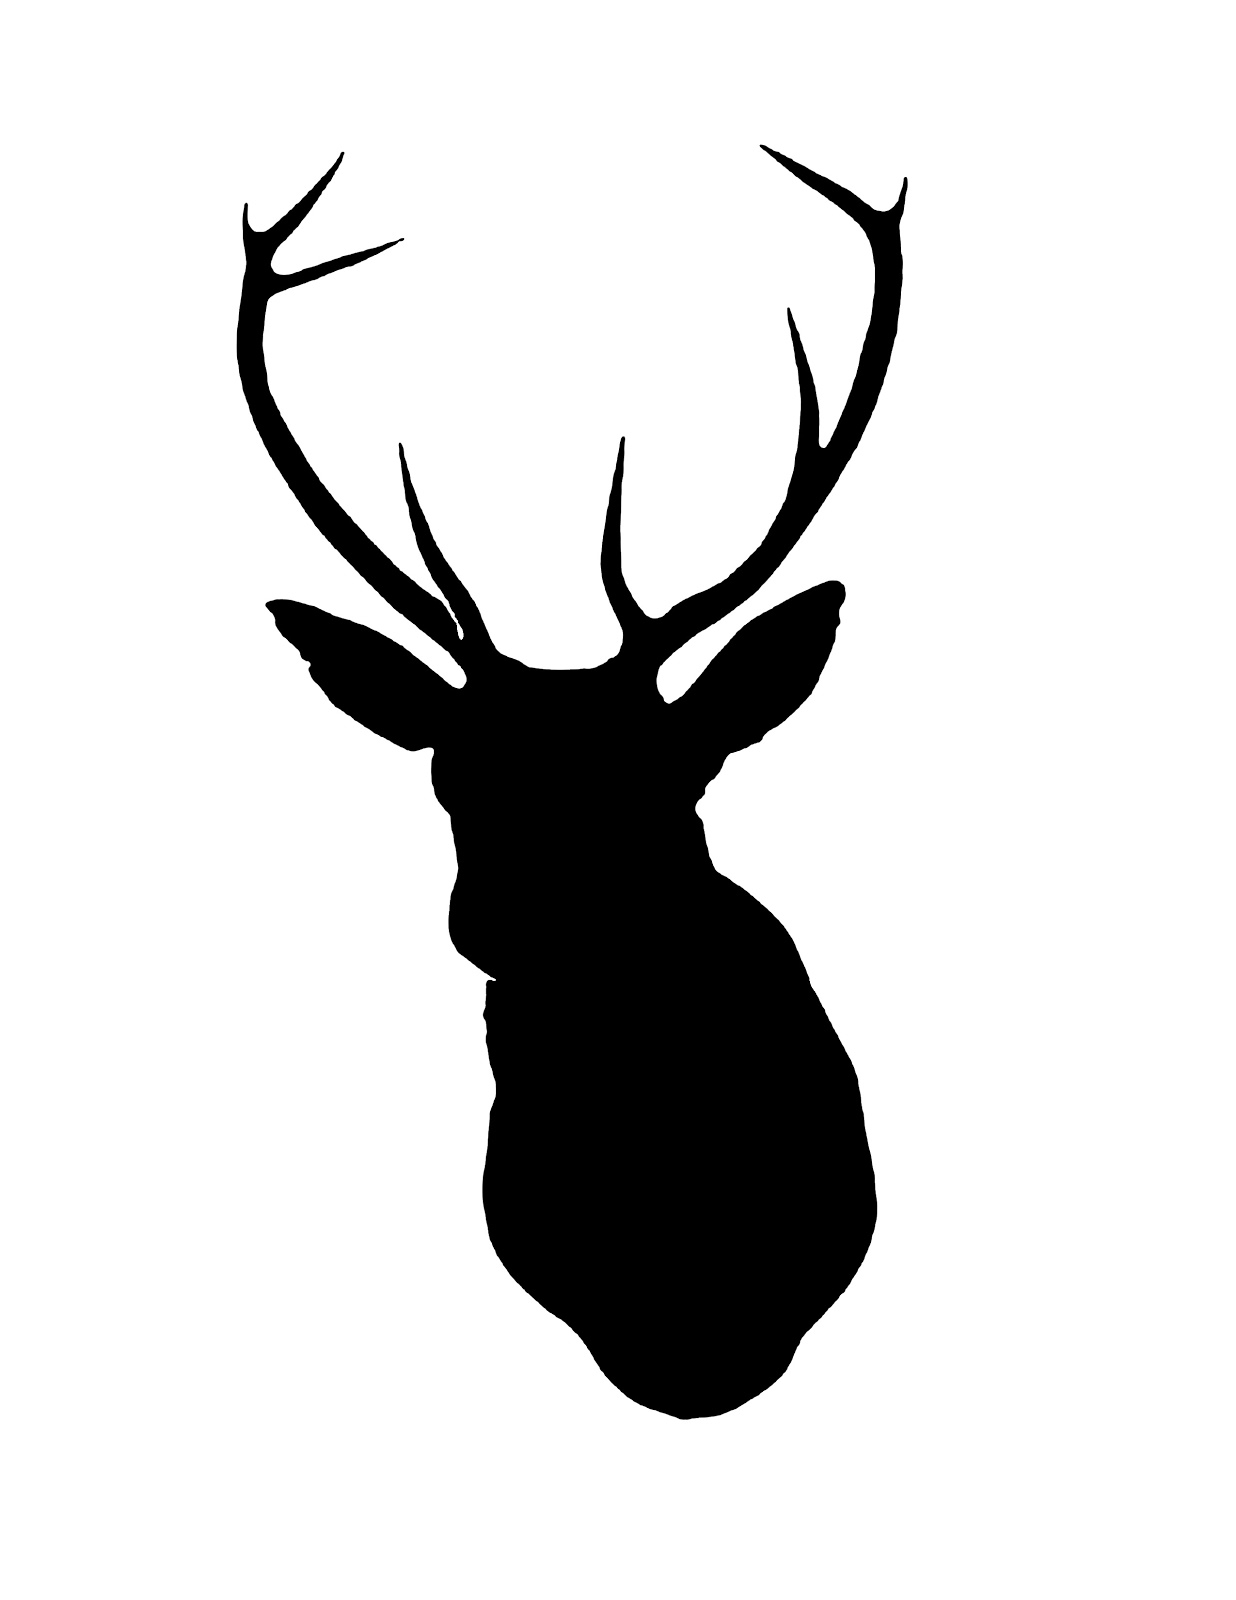 How To Draw A Deer Head Silhouette